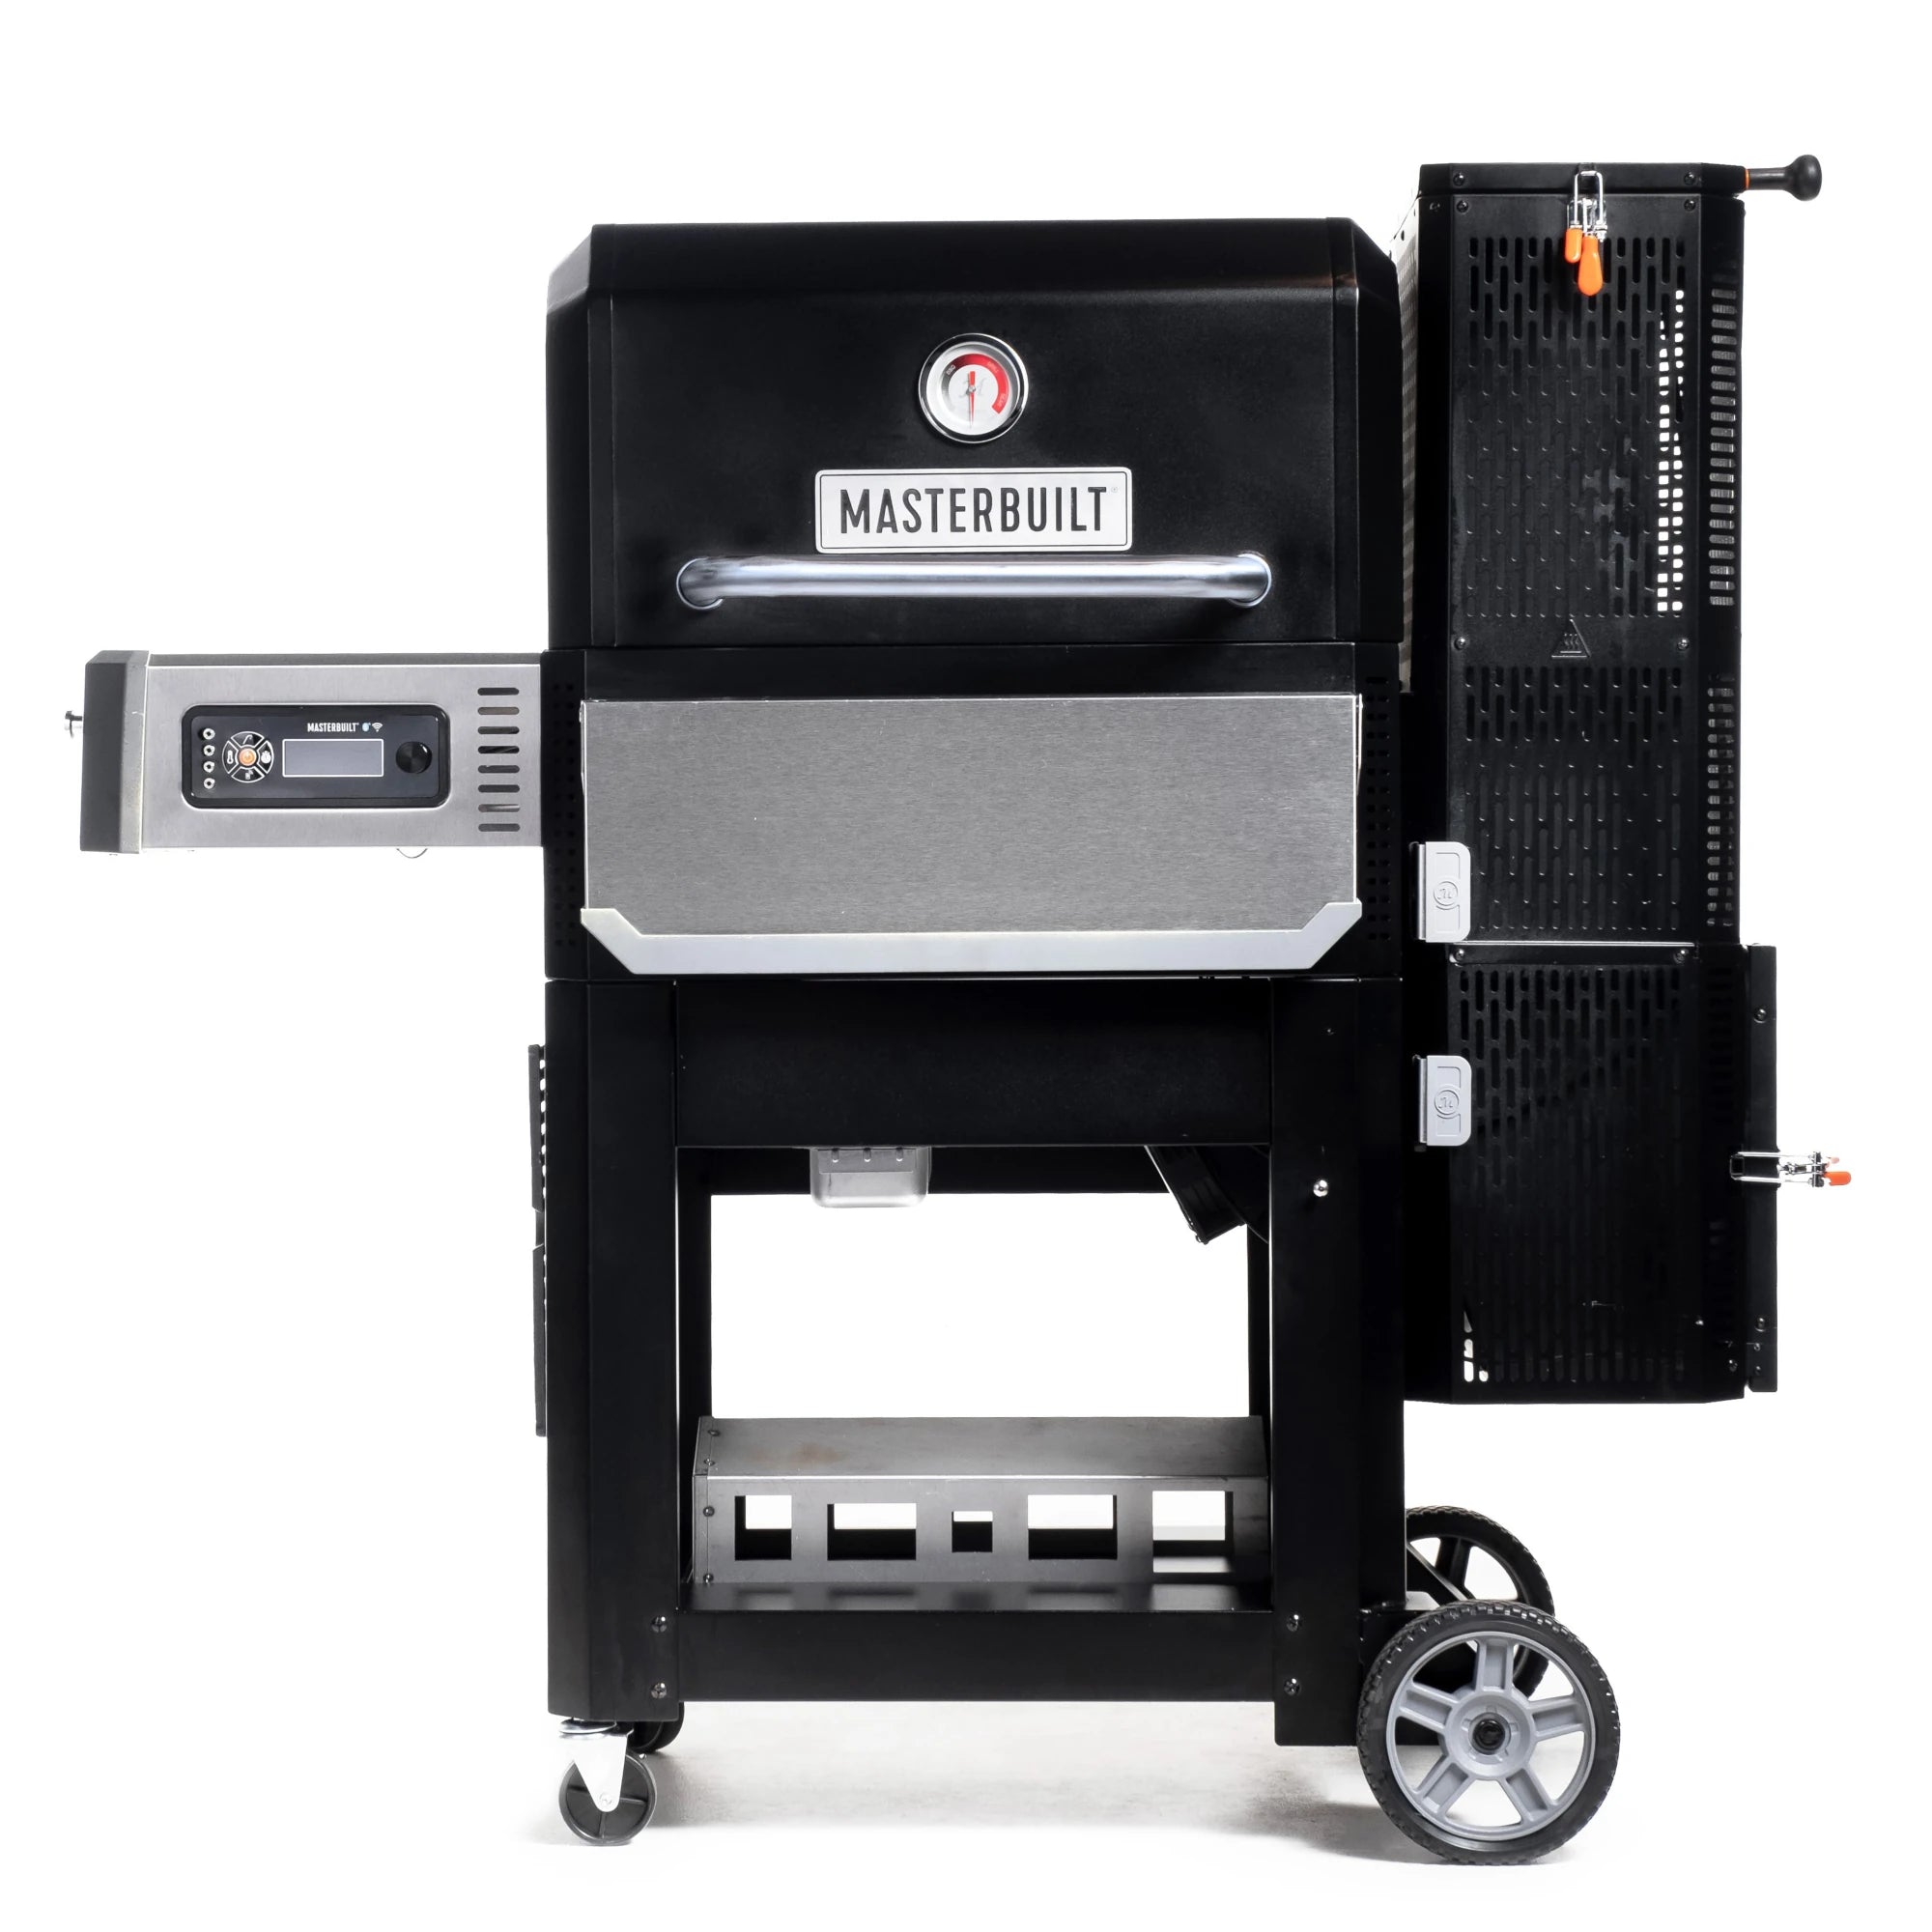 Must Have Gas and Charcoal Grills Accessories - It Is a Keeper